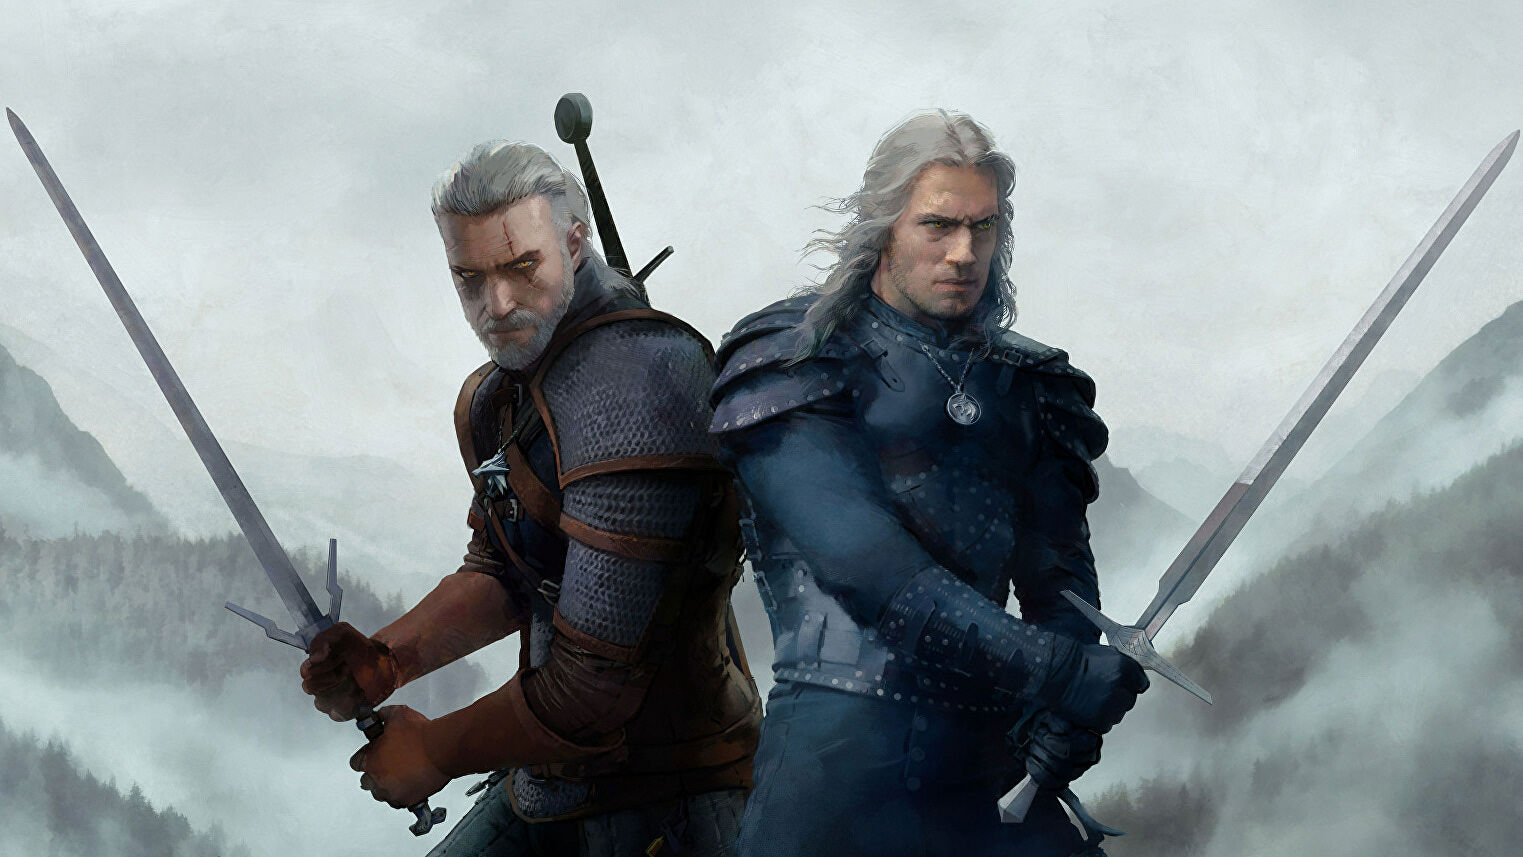 The Witcher 3 is getting killer upgrades for PS5 and Xbox Series X